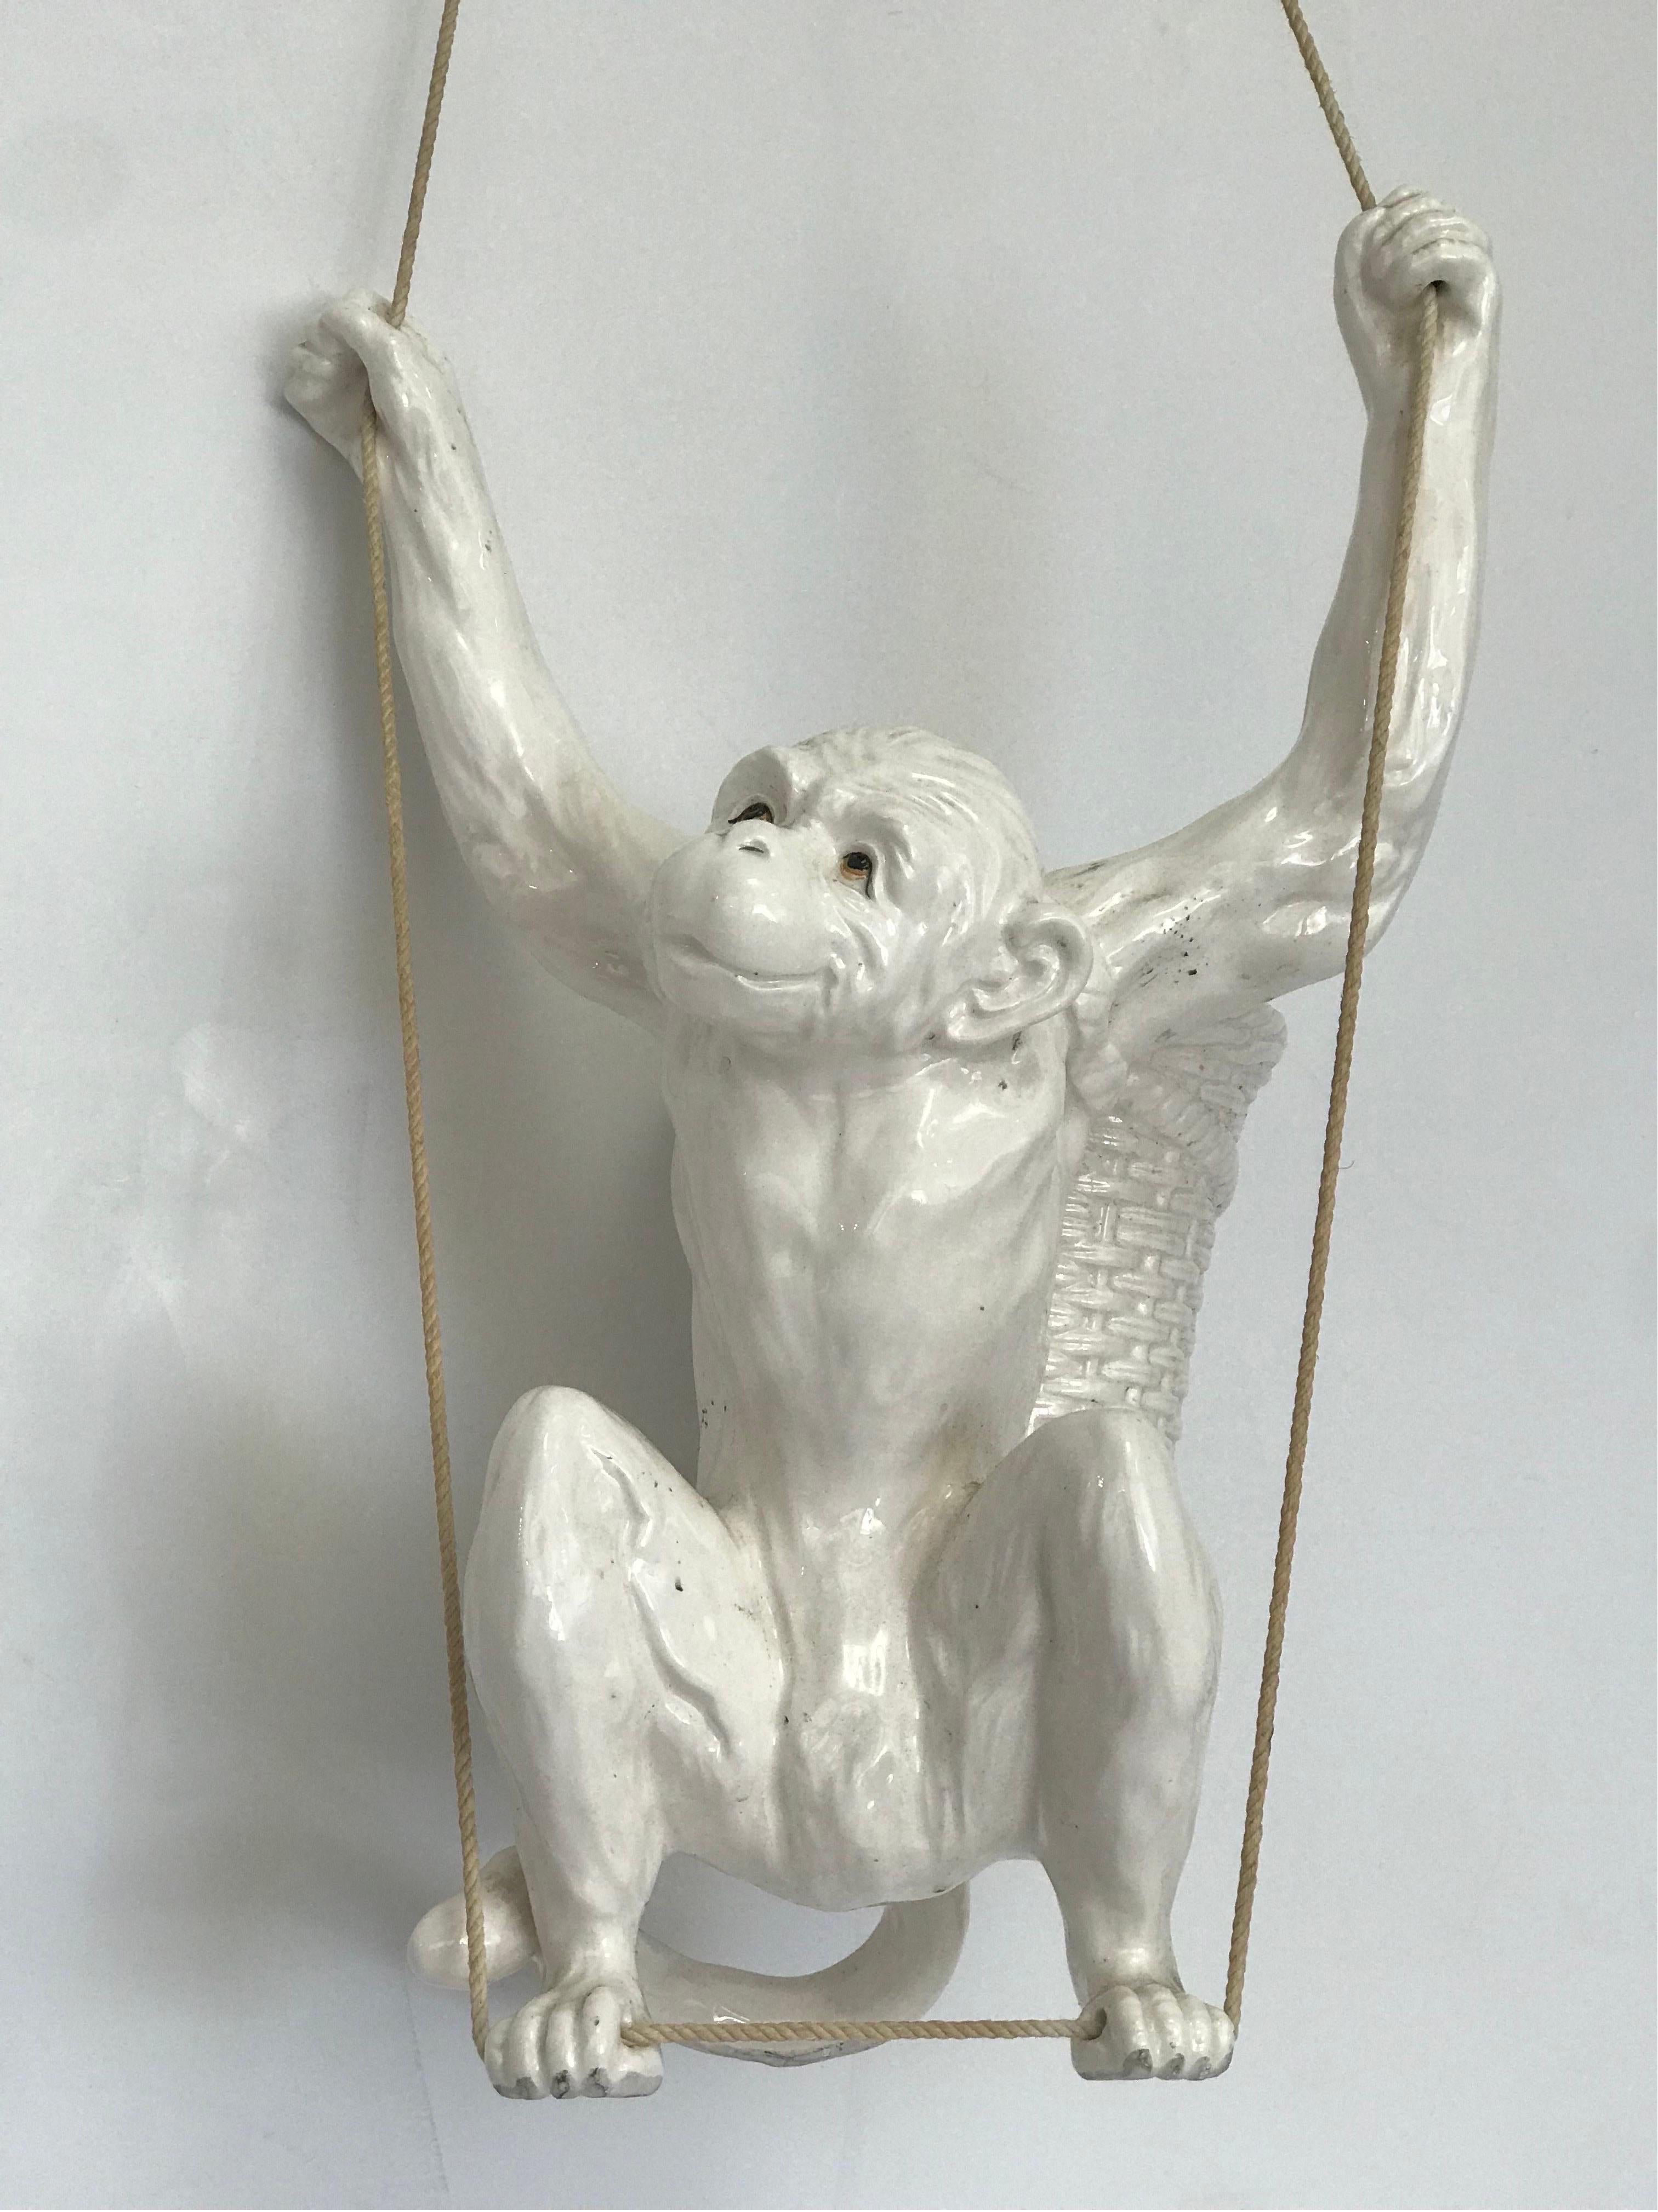 Hanging Ceramic Monkey Planter by Fits and Floyd, 1976 For Sale 7